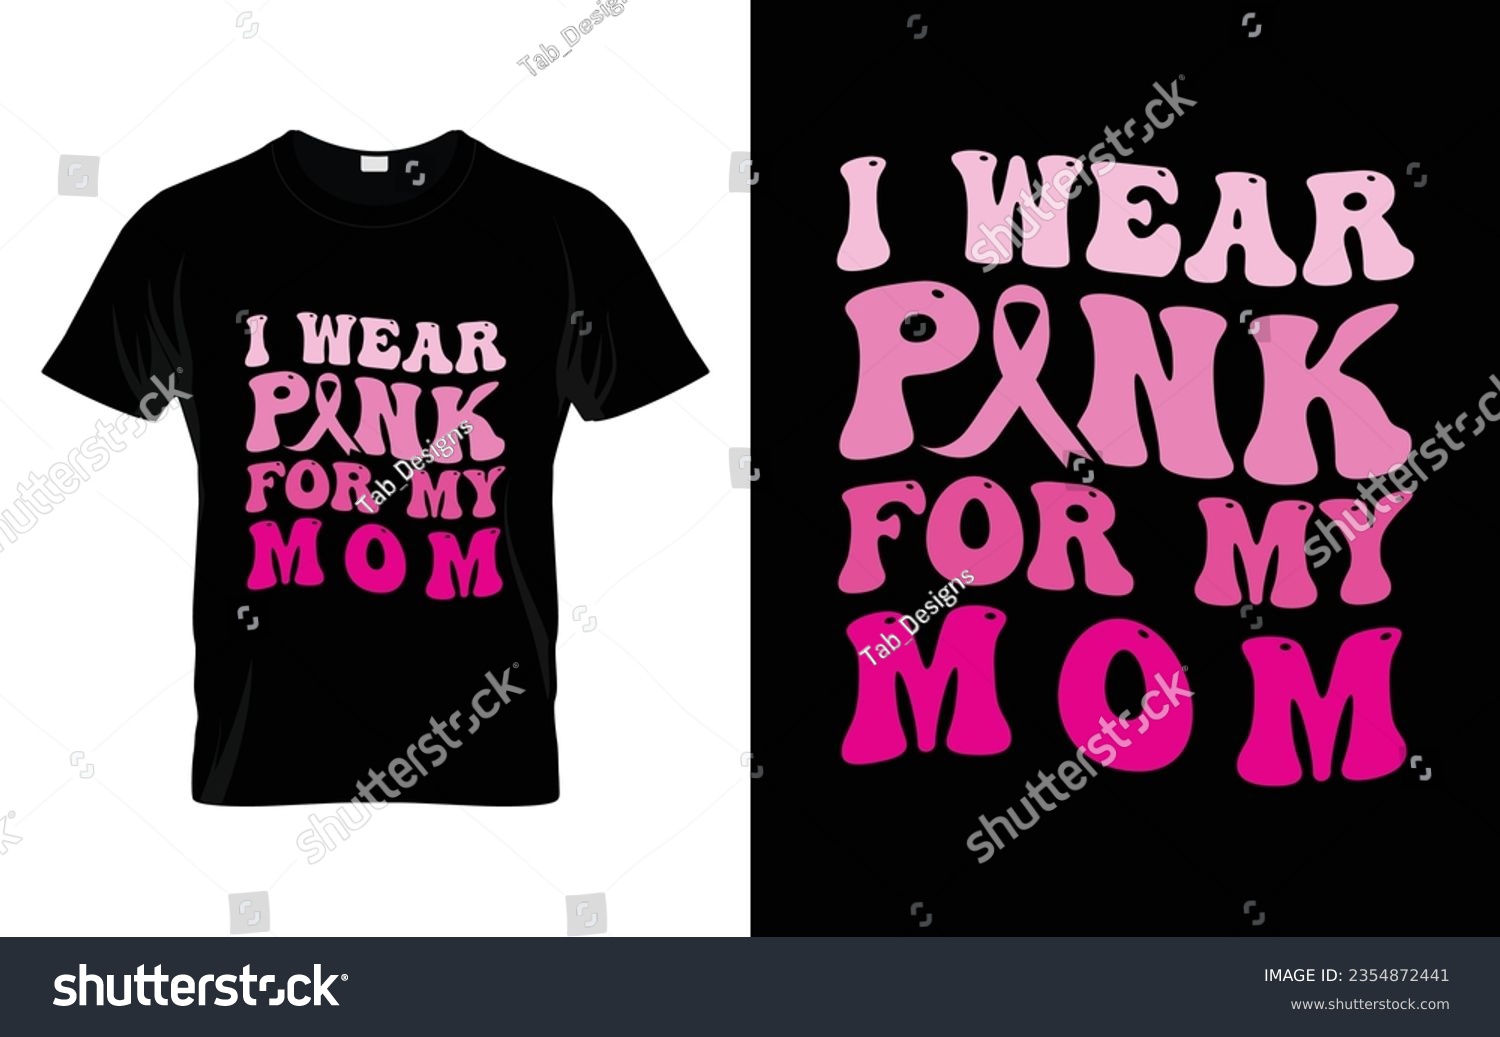 SVG of I wear pink for my Mom pink ribbon Groovy Breast Cancer Awareness Month T shirt Design || Breast Cancer Awareness Groovy t shirt design. svg